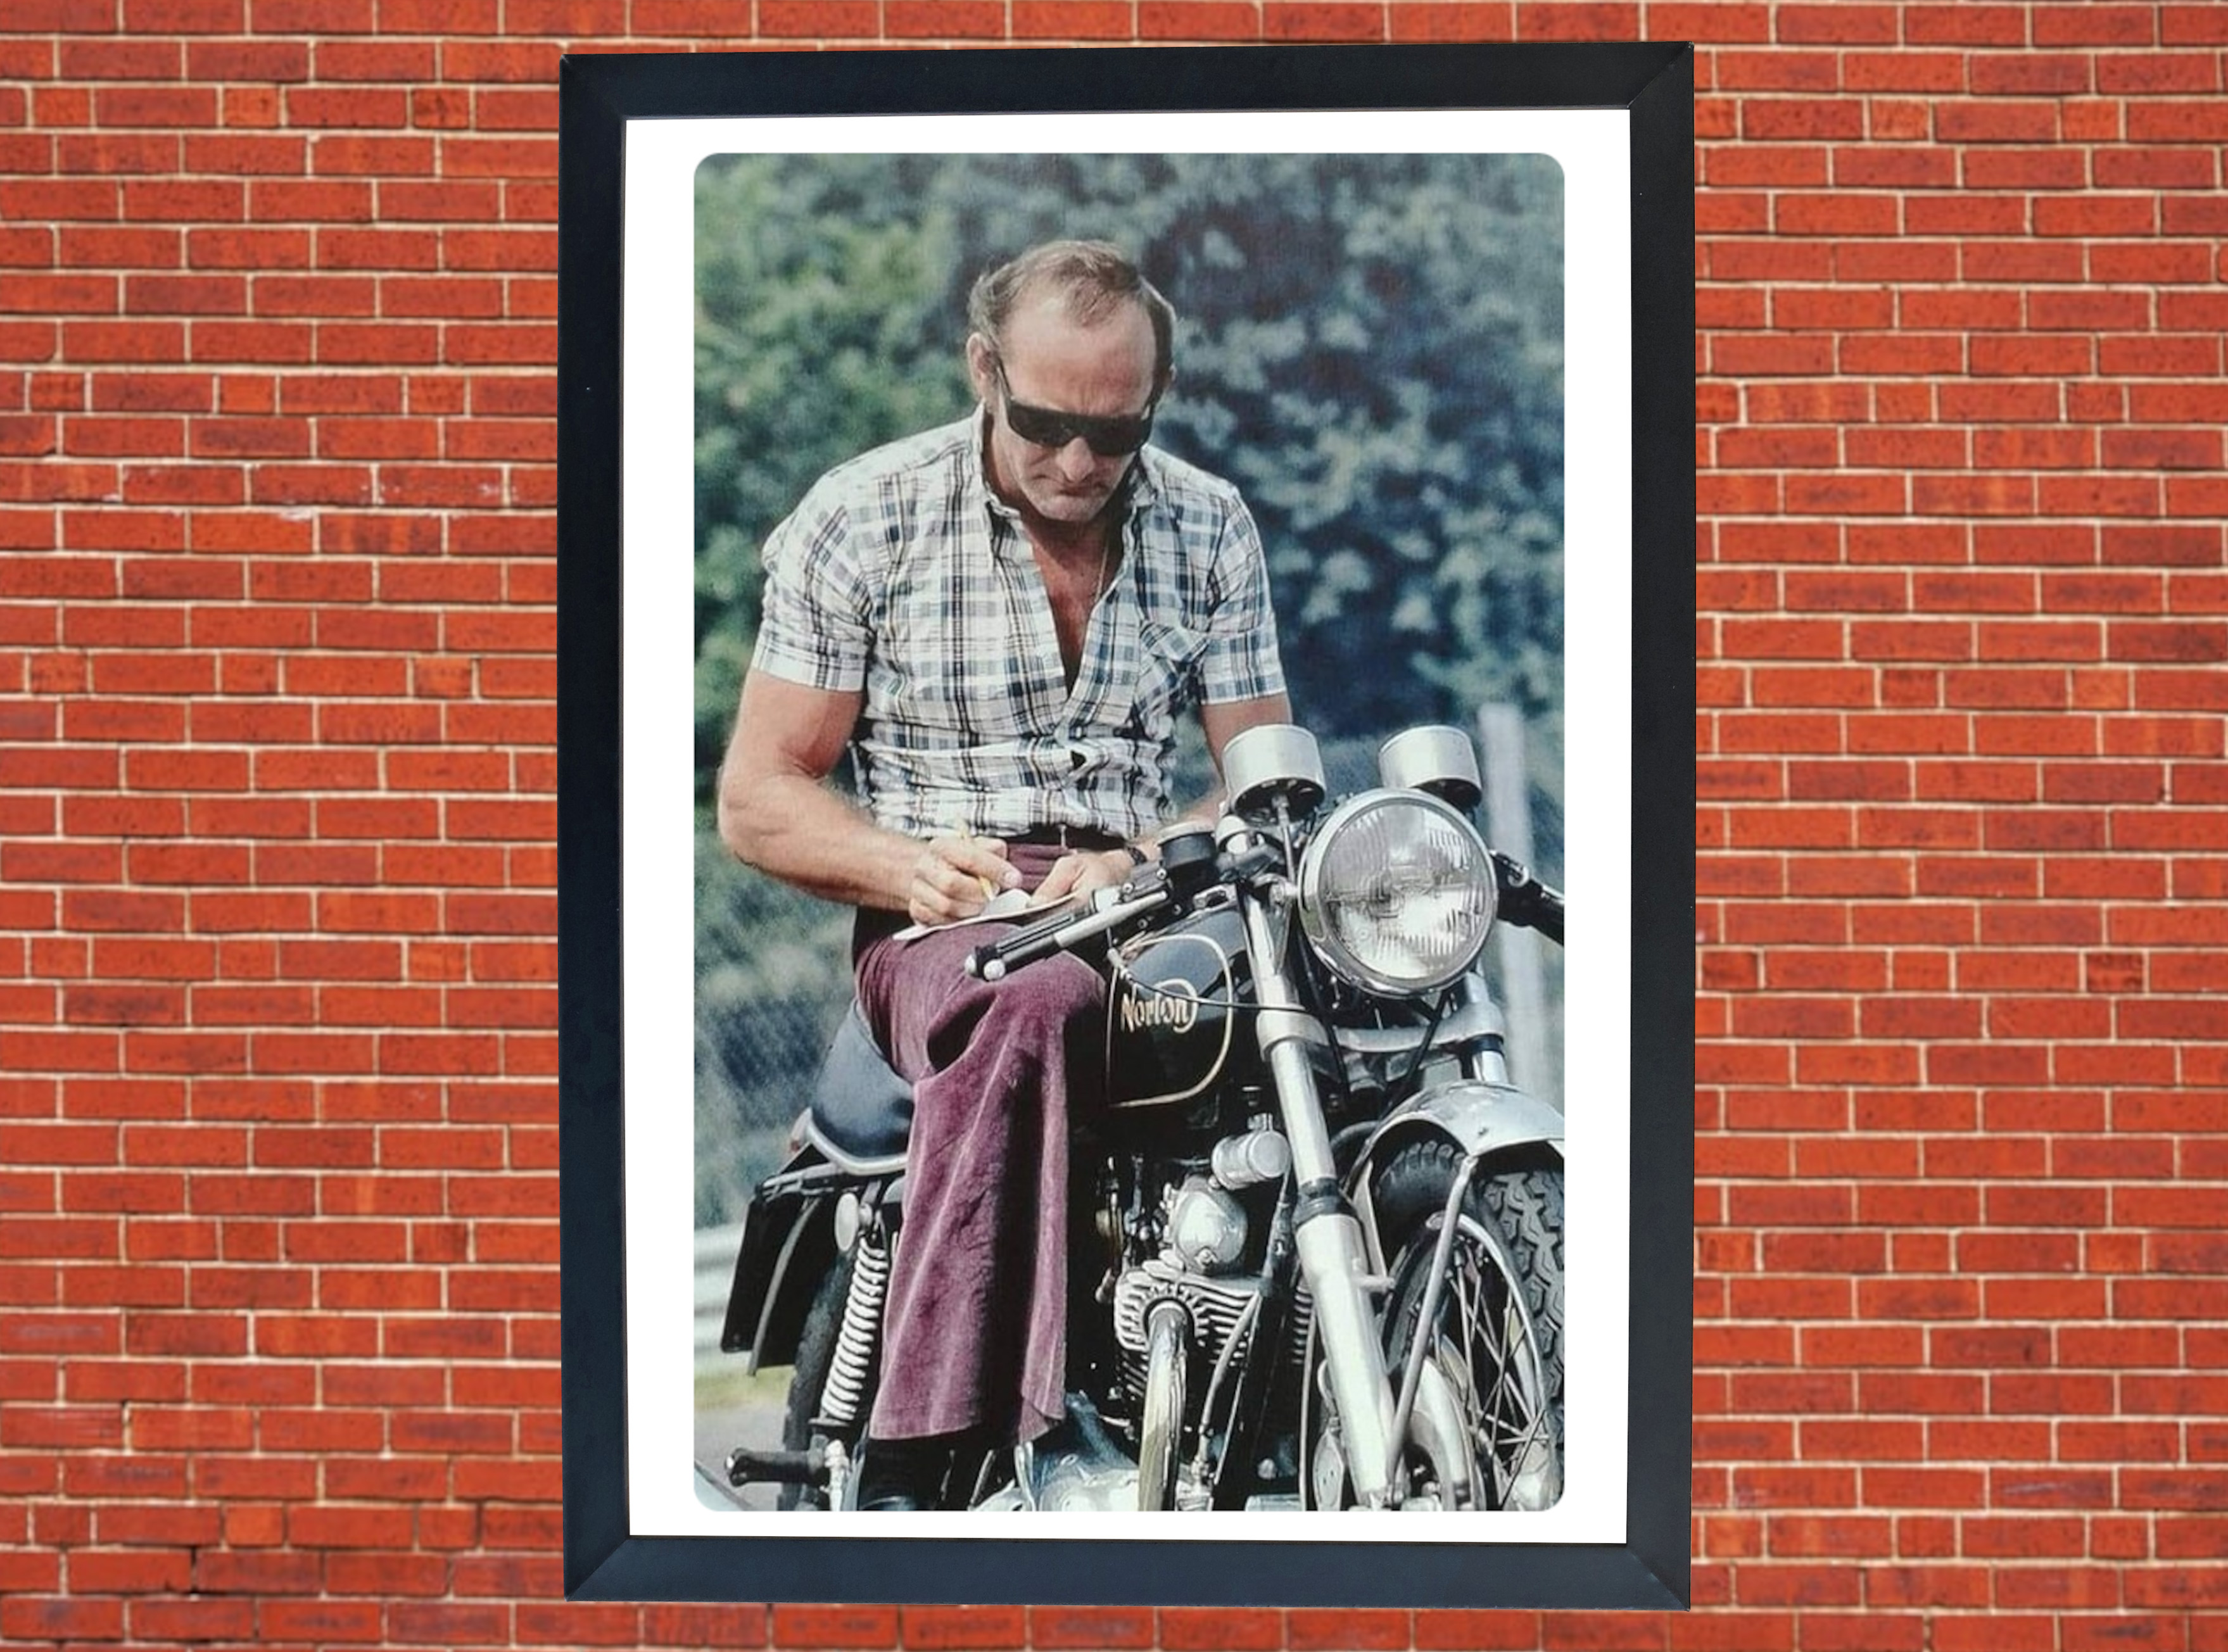 Mike Hailwood on Norton Commando Motorbike Motorcycle - A3/A4 Size Print Poster